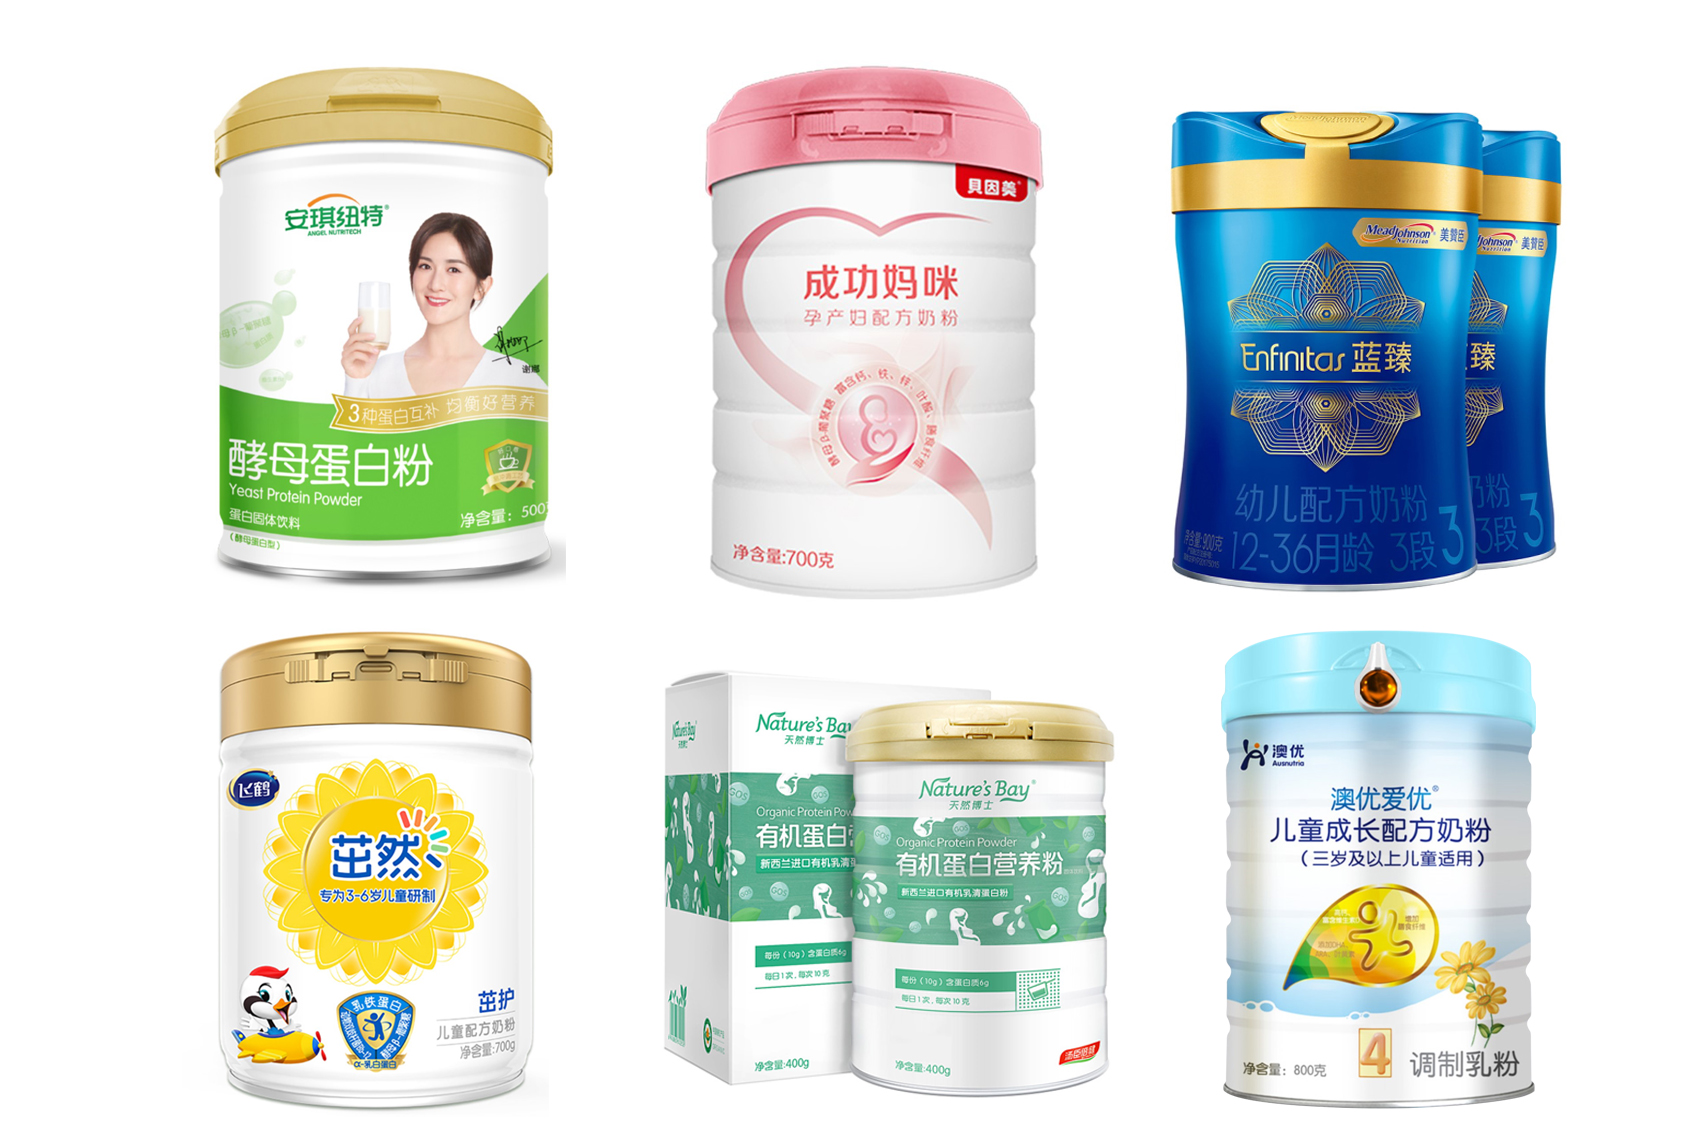 The application of yeast beta-glucan received explosive growth in China's functional foods industry